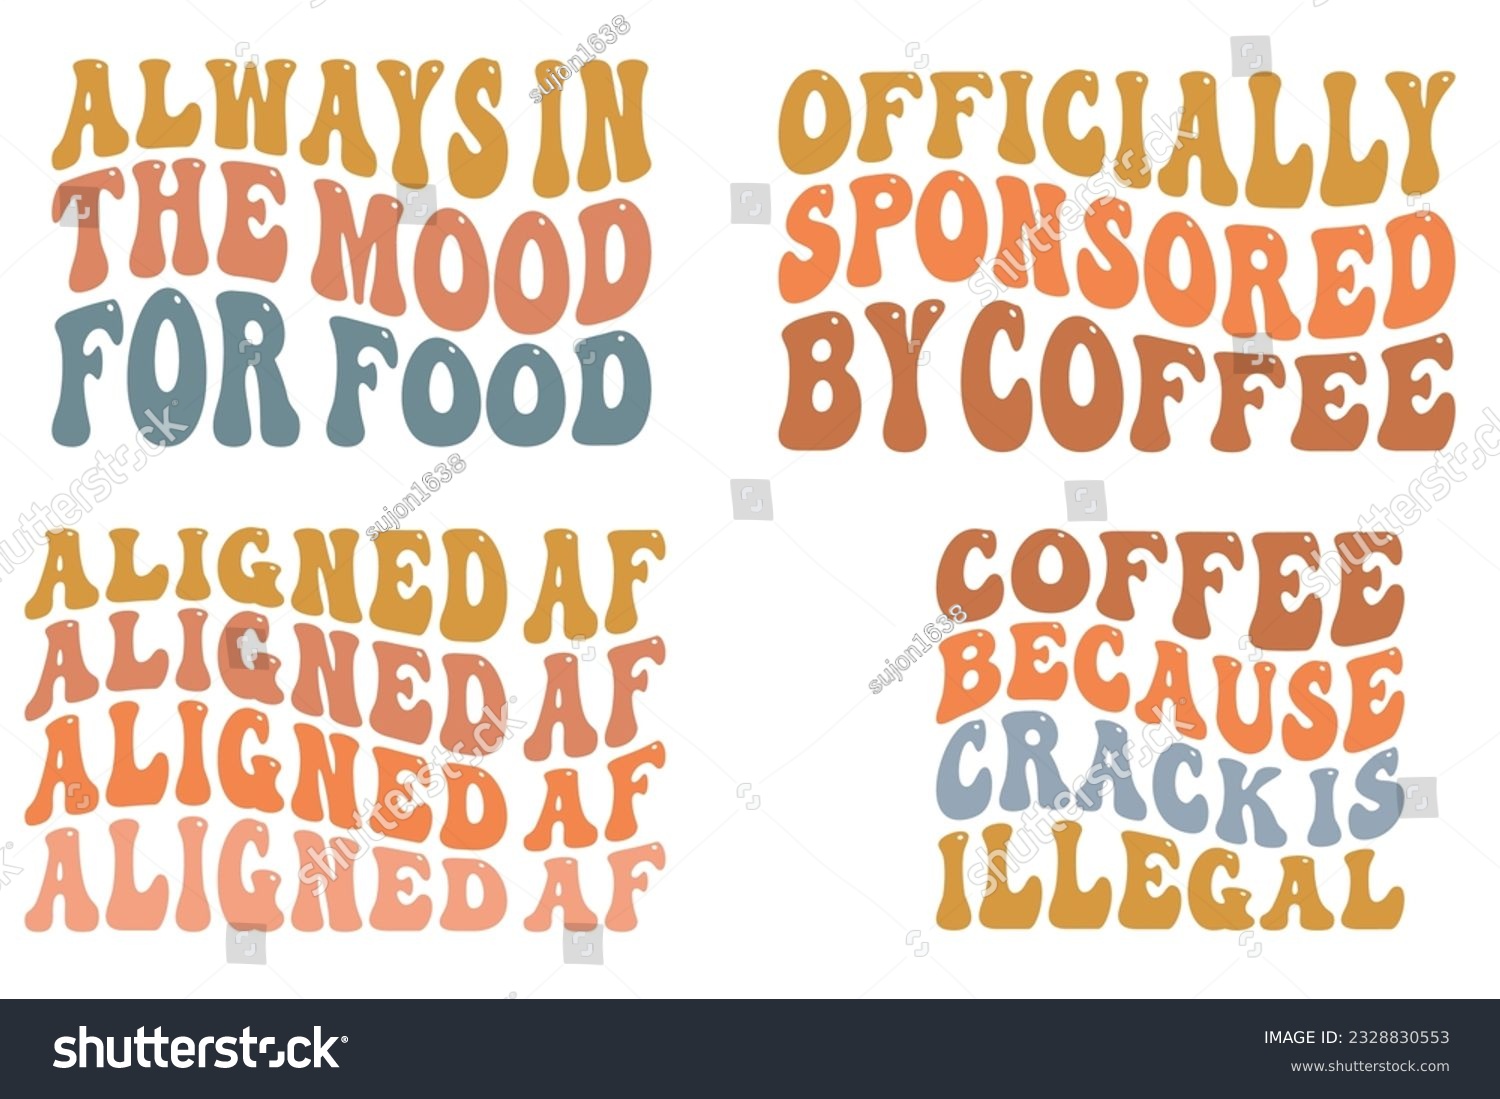 SVG of Always in the Mood for Food, Officially Sponsored by Coffee, Aligned AF, Coffee Because Crack is Illegal retro wavy SVG bundle T-shirt svg